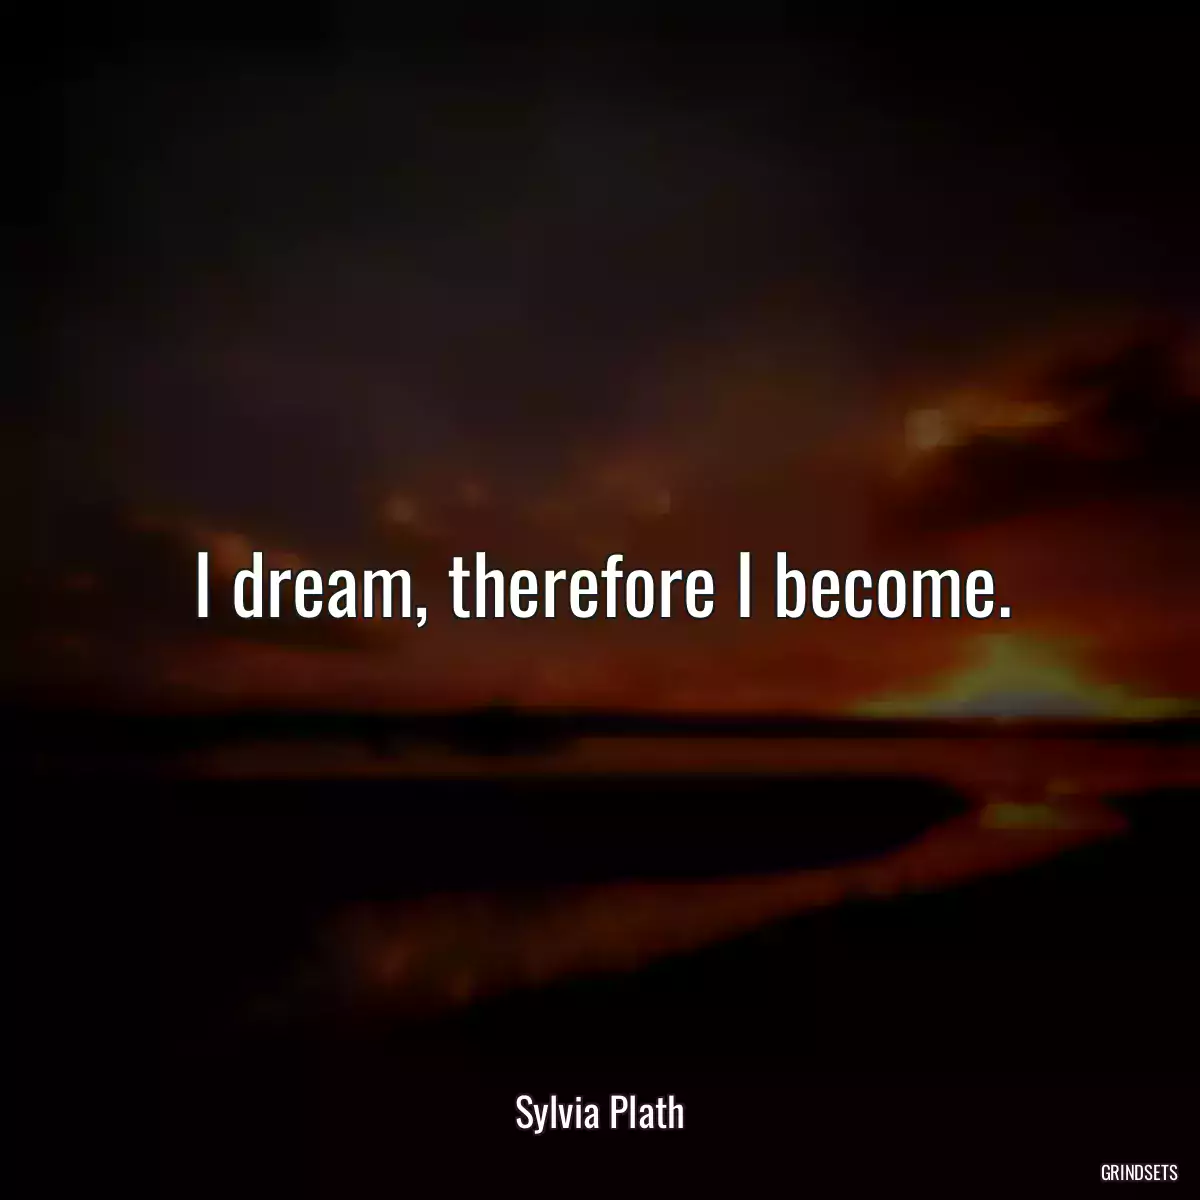 I dream, therefore I become.